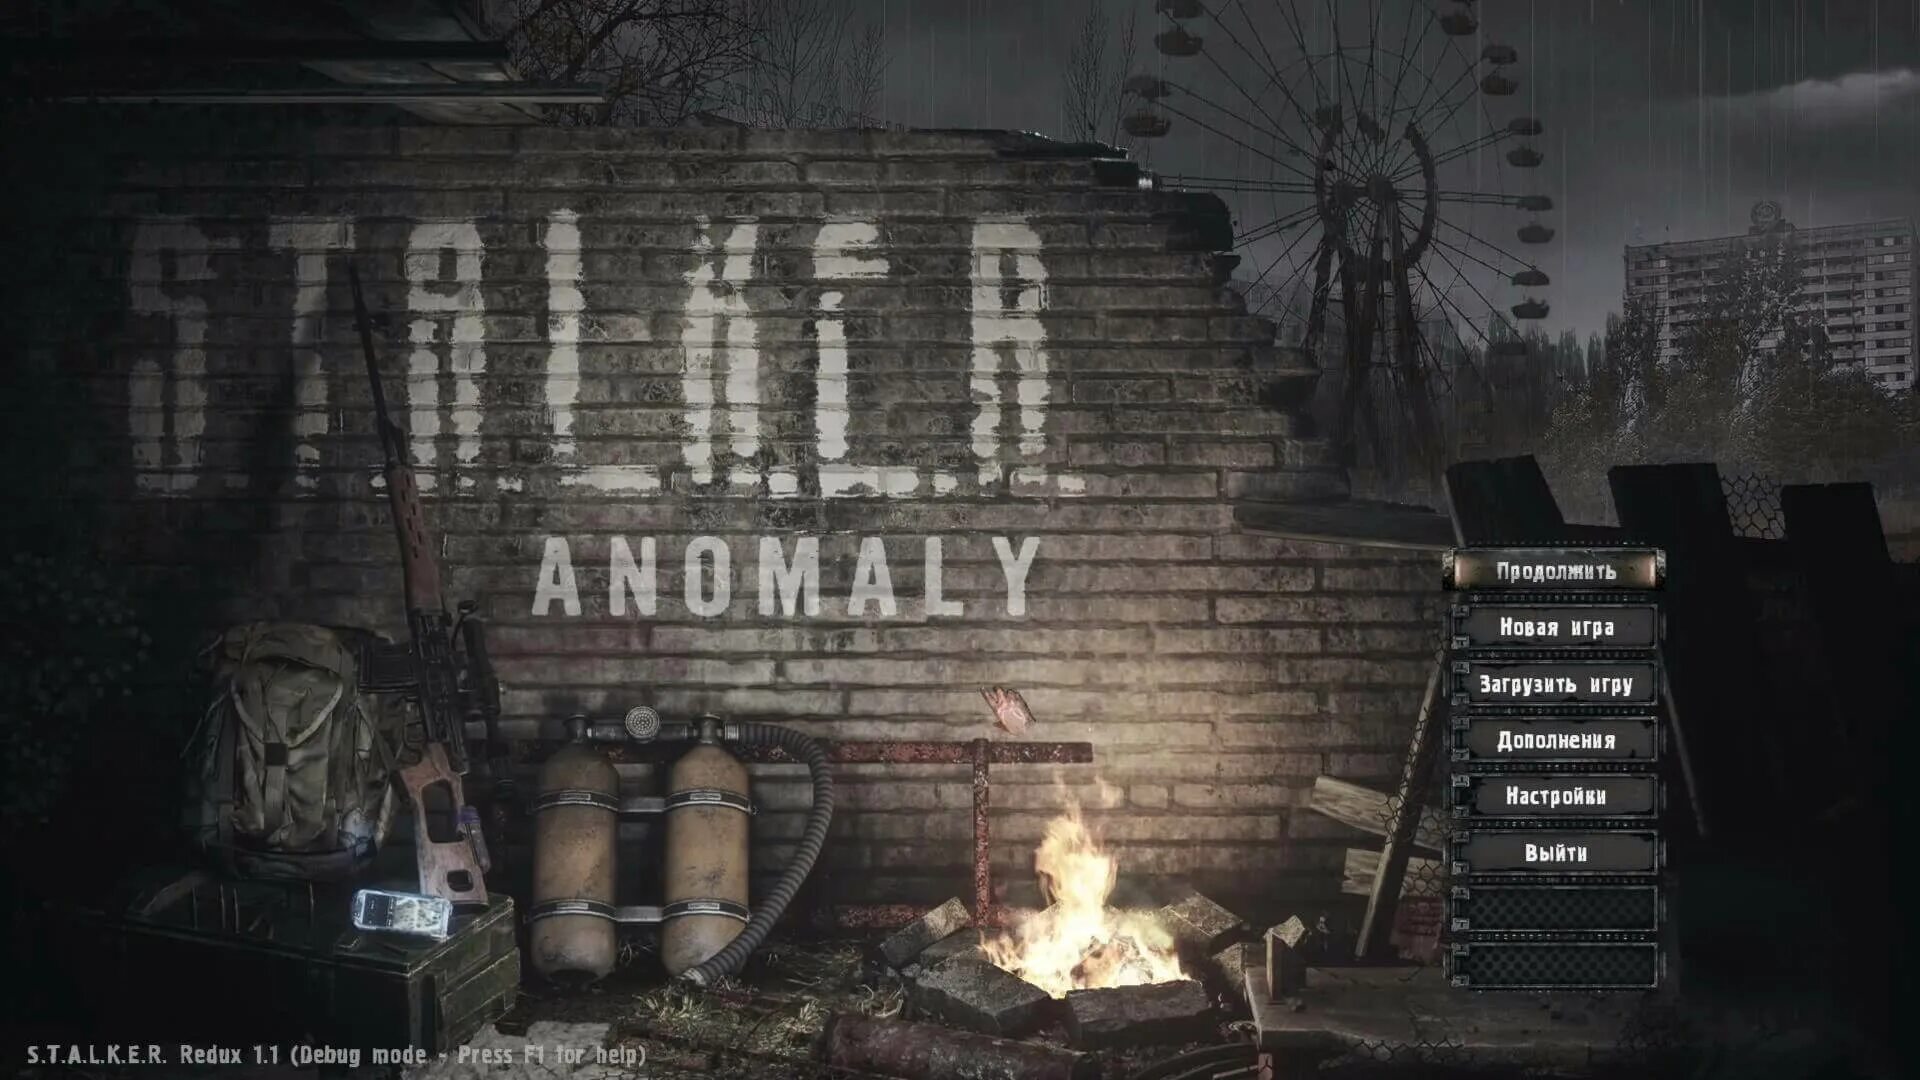 Call of chernobyl anomaly. Сталкер аномалия 1.5.1 редукс. Сталкер Anomaly 1.5.1 - Redux 1.1. S.T.A.L.K.E.R. Anomaly 1.5.2. S.T.A.L.K.E.R. Anomaly 1.5.1.